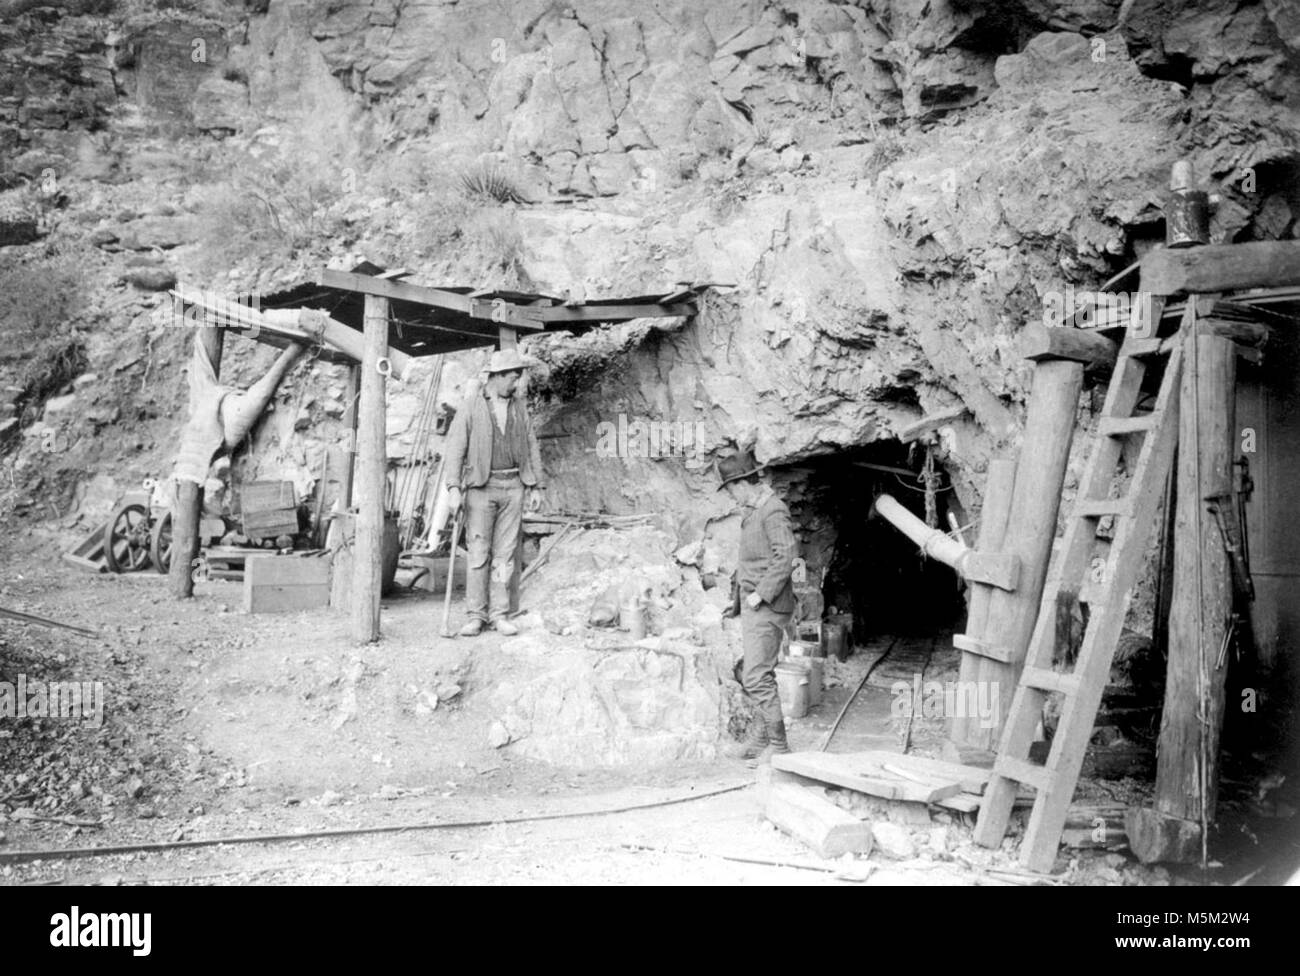 Grand Canyon Historic Grandview Trail . 2 MEN STANDING AT ENTRANCE OF NEW TUNNEL, HORSESHOE MESA COPPER MINE. LEVEL 7. GRANDVIEW CIRCA 1907.. Impressions of the dazzling topography of Grand Canyon have changed and shifted since that day in the summer of 1540 when Garcia Lopez de Cardenas gazed out from the South Rim. The conquistador saw a worthless desert wasteland, nothing more than a barrier to political expansion. At th Stock Photo